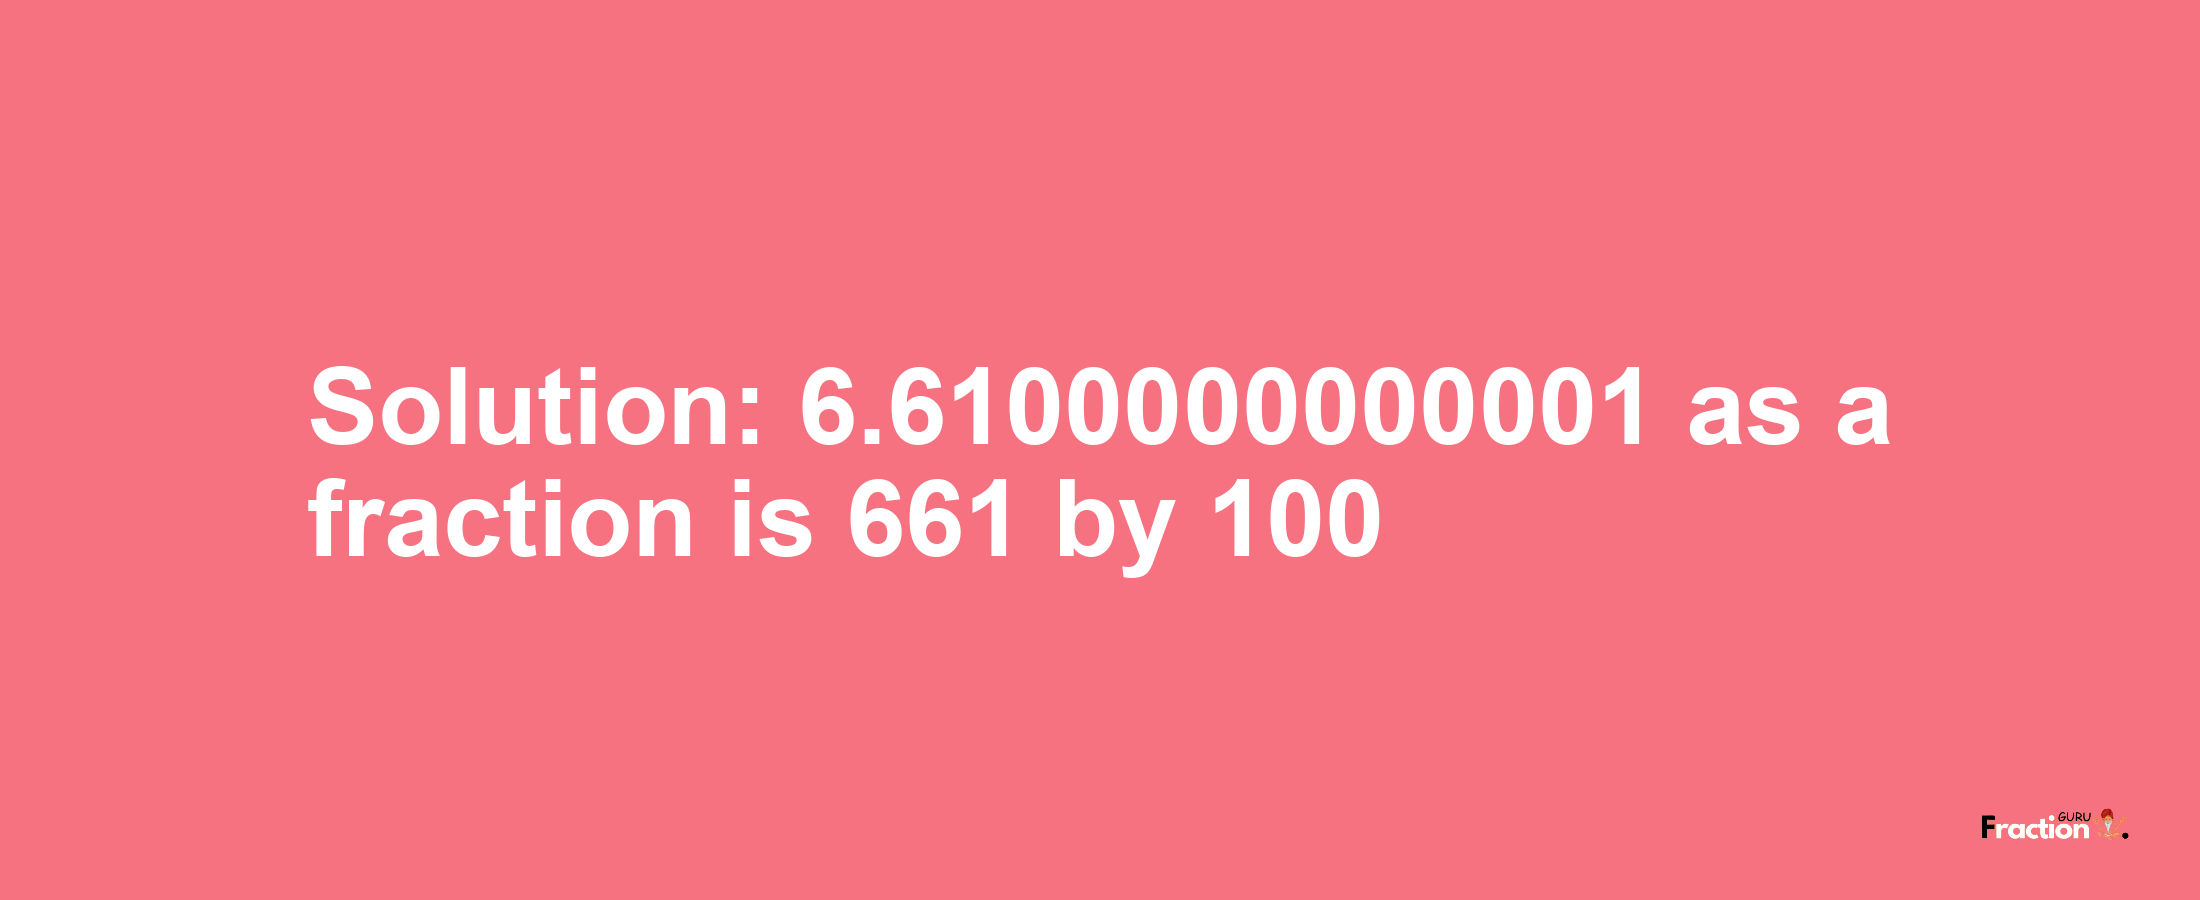 Solution:6.6100000000001 as a fraction is 661/100